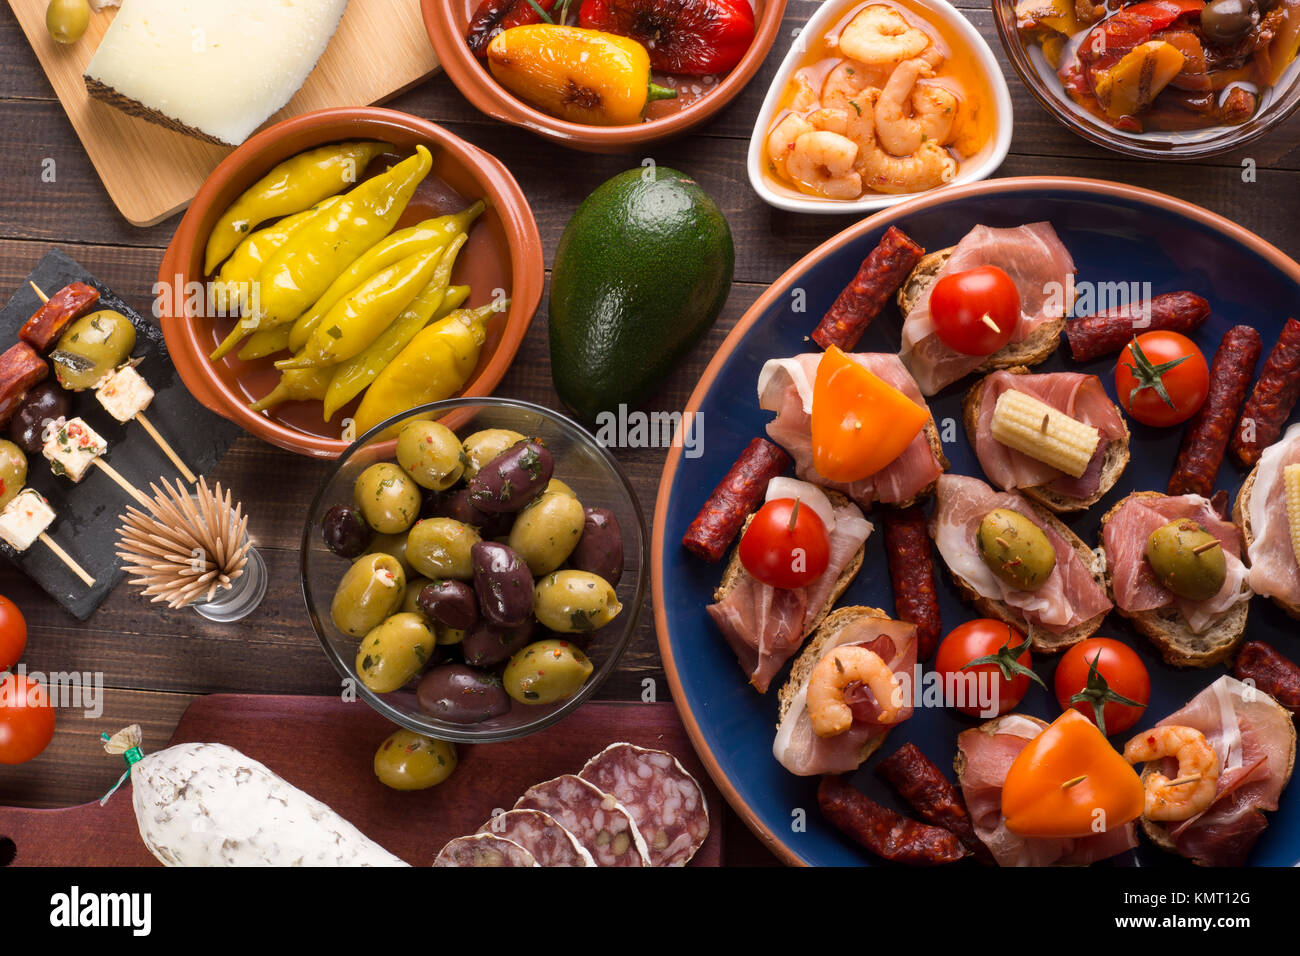 Sharing mixed spanish tapas starters on table. Top view Stock Photo